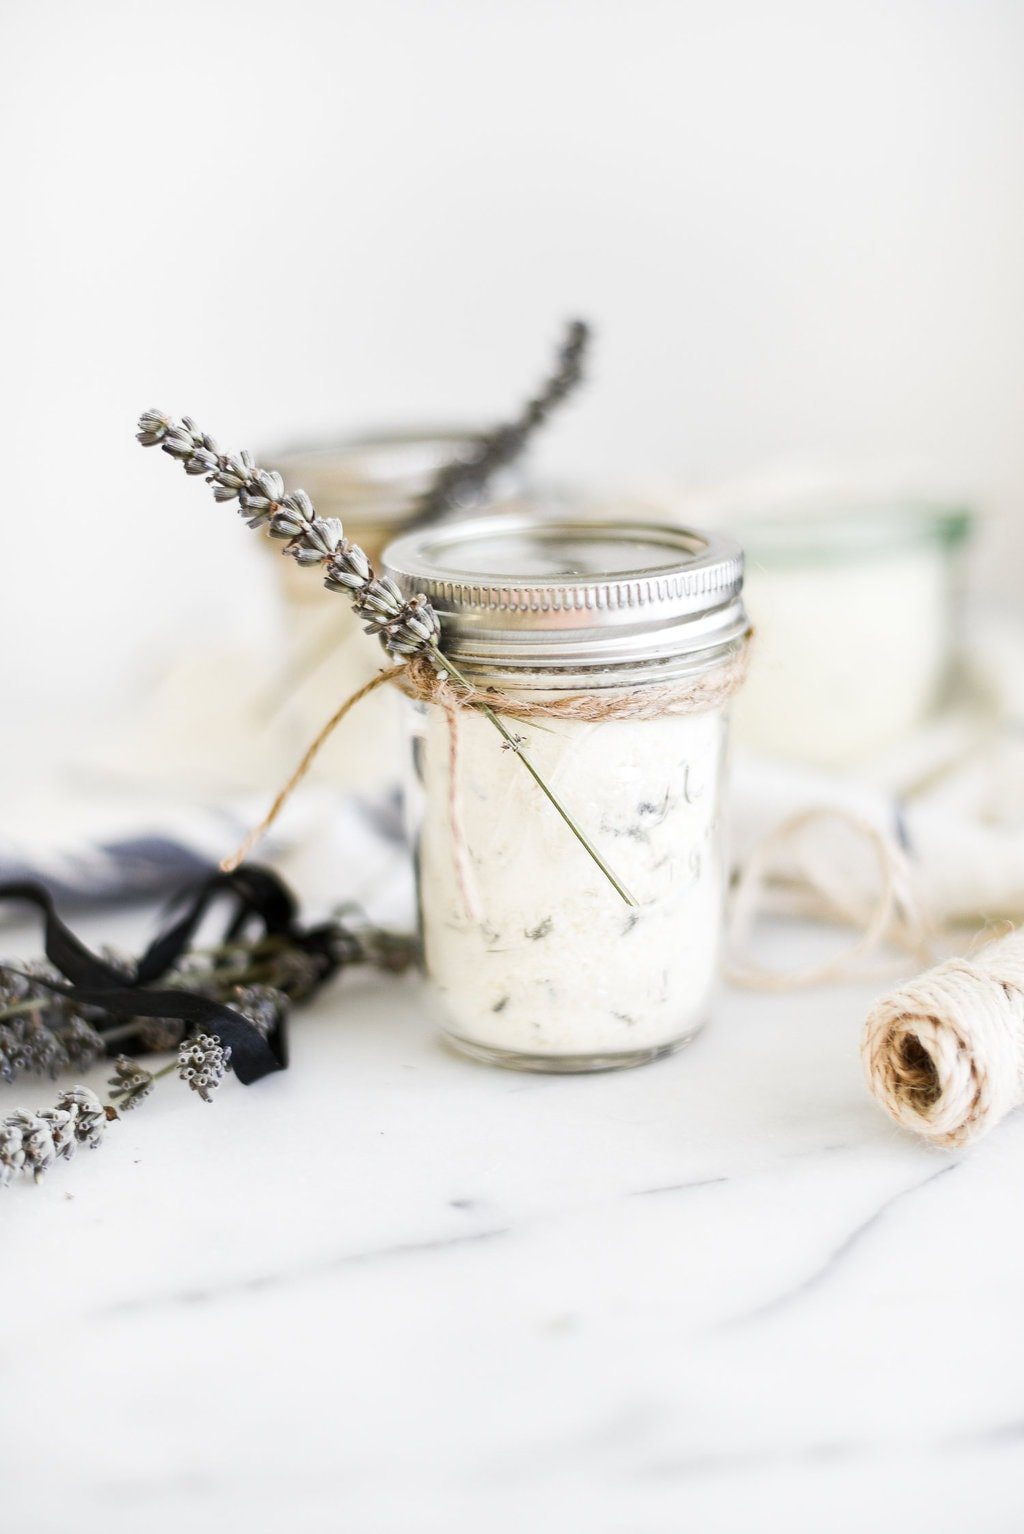 Top 20 best DIY Mother's Day gifts on a budget - Lavender Bath Soak